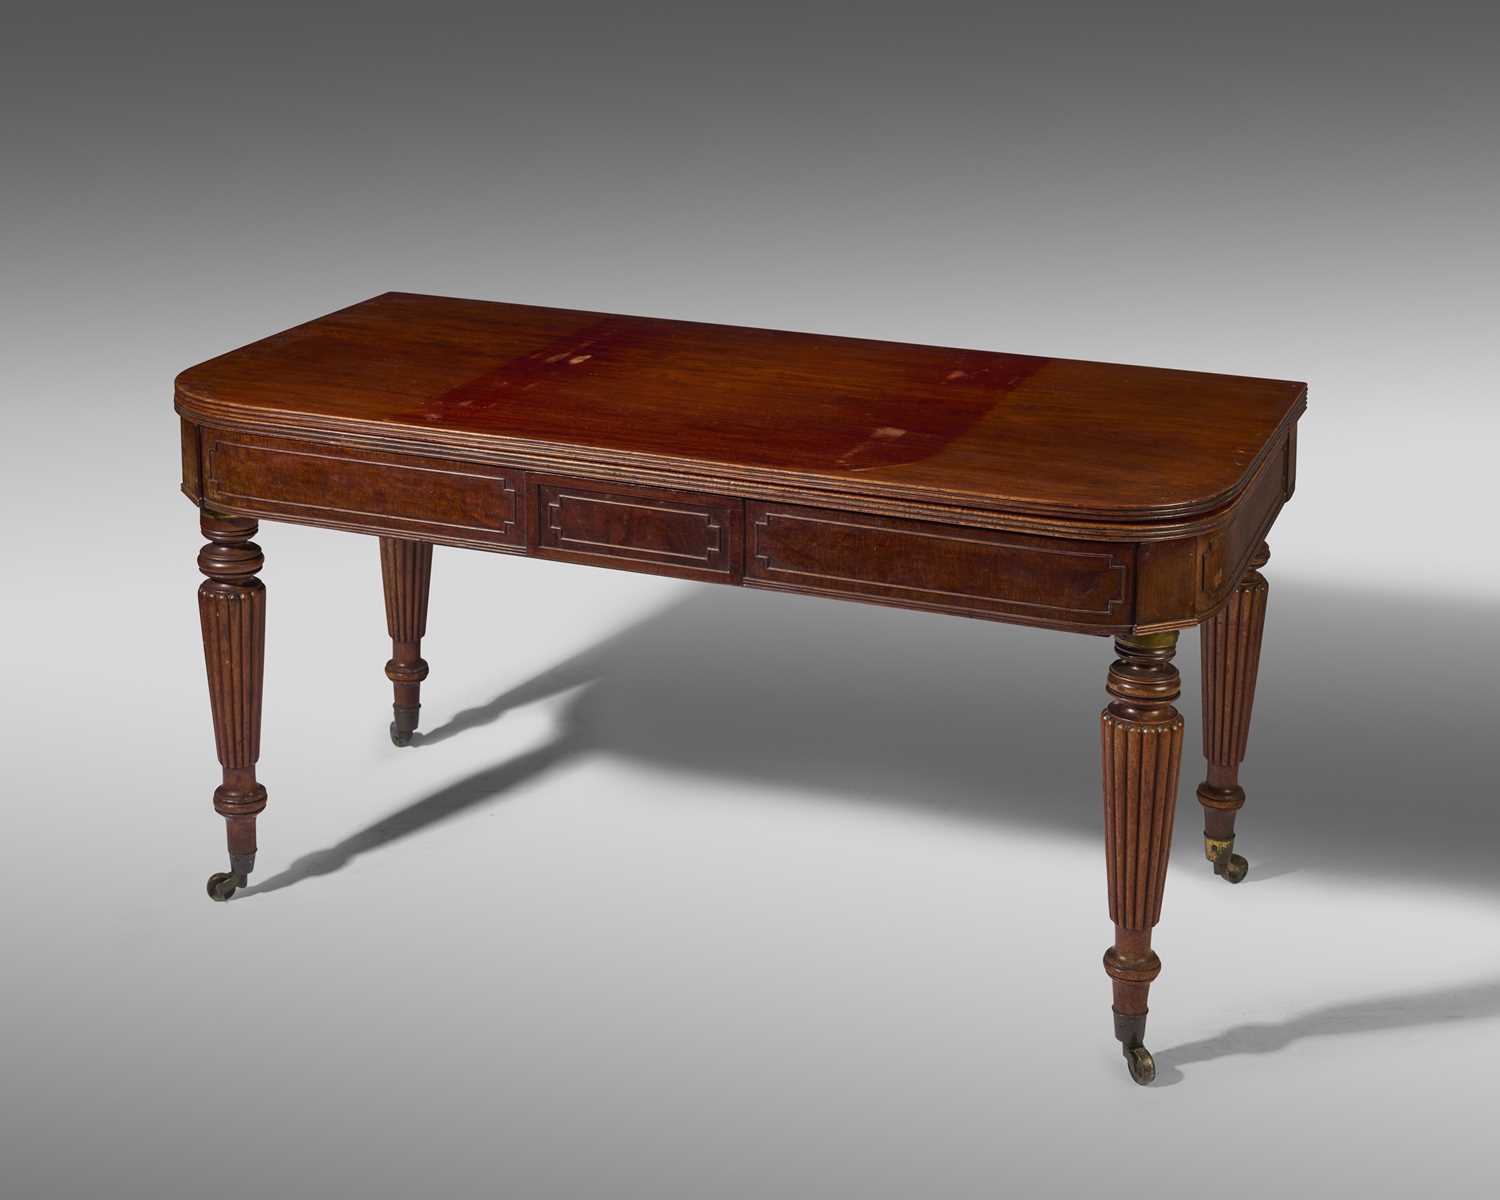 A RARE GEORGE IV MAHOGANY CAMPAIGN DINING TABLE BY CHARLES STEWART, LONDON, C.1820 with brass